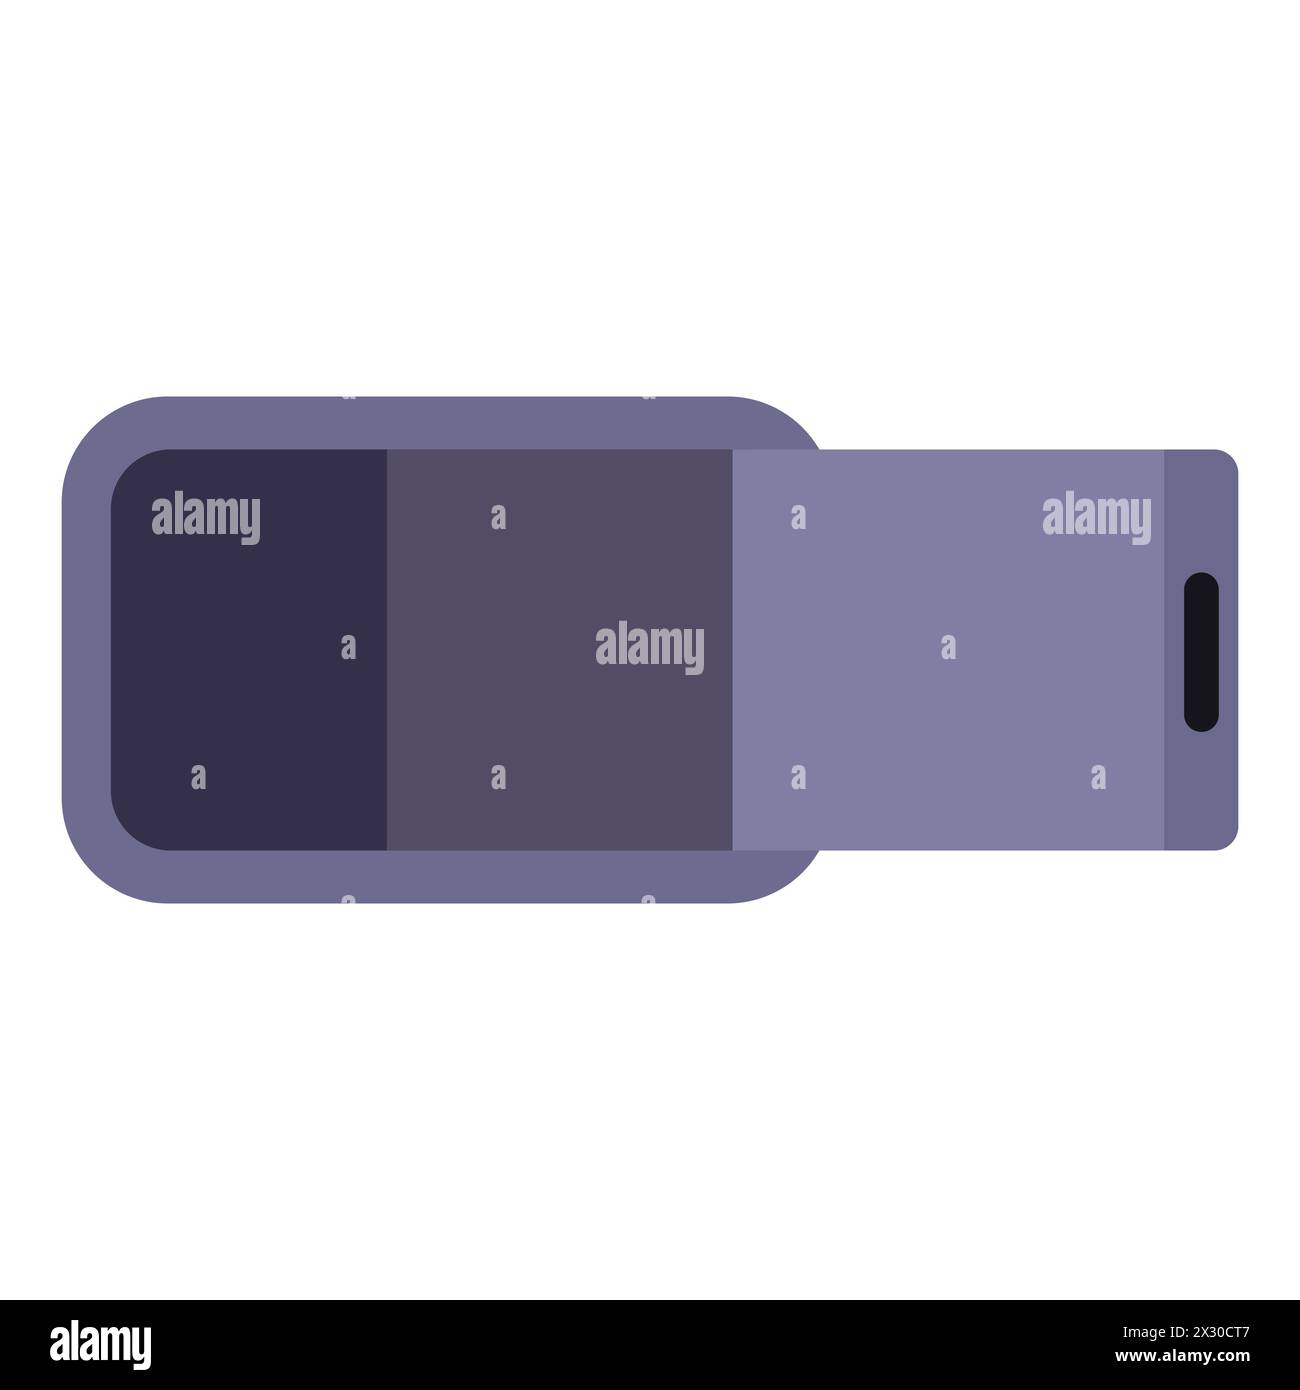 Flash drive, storage medium, modern technology, usb-s, data, flat design, simple image, cartoon style. Data storage and protection concept. Vector lin Stock Vector